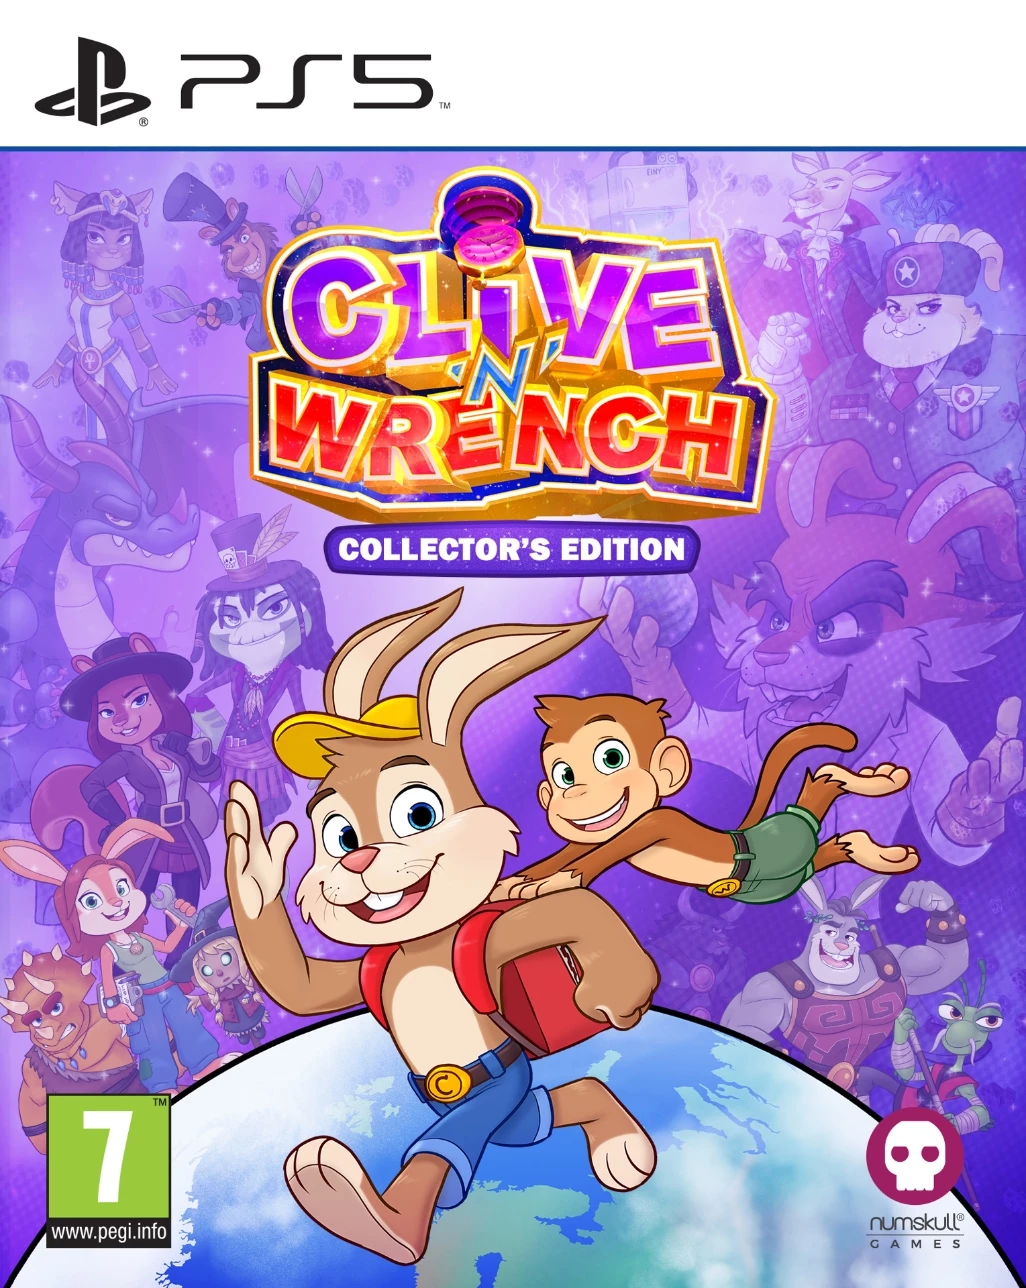 Clive 'n' Wrench - Collector's Edition